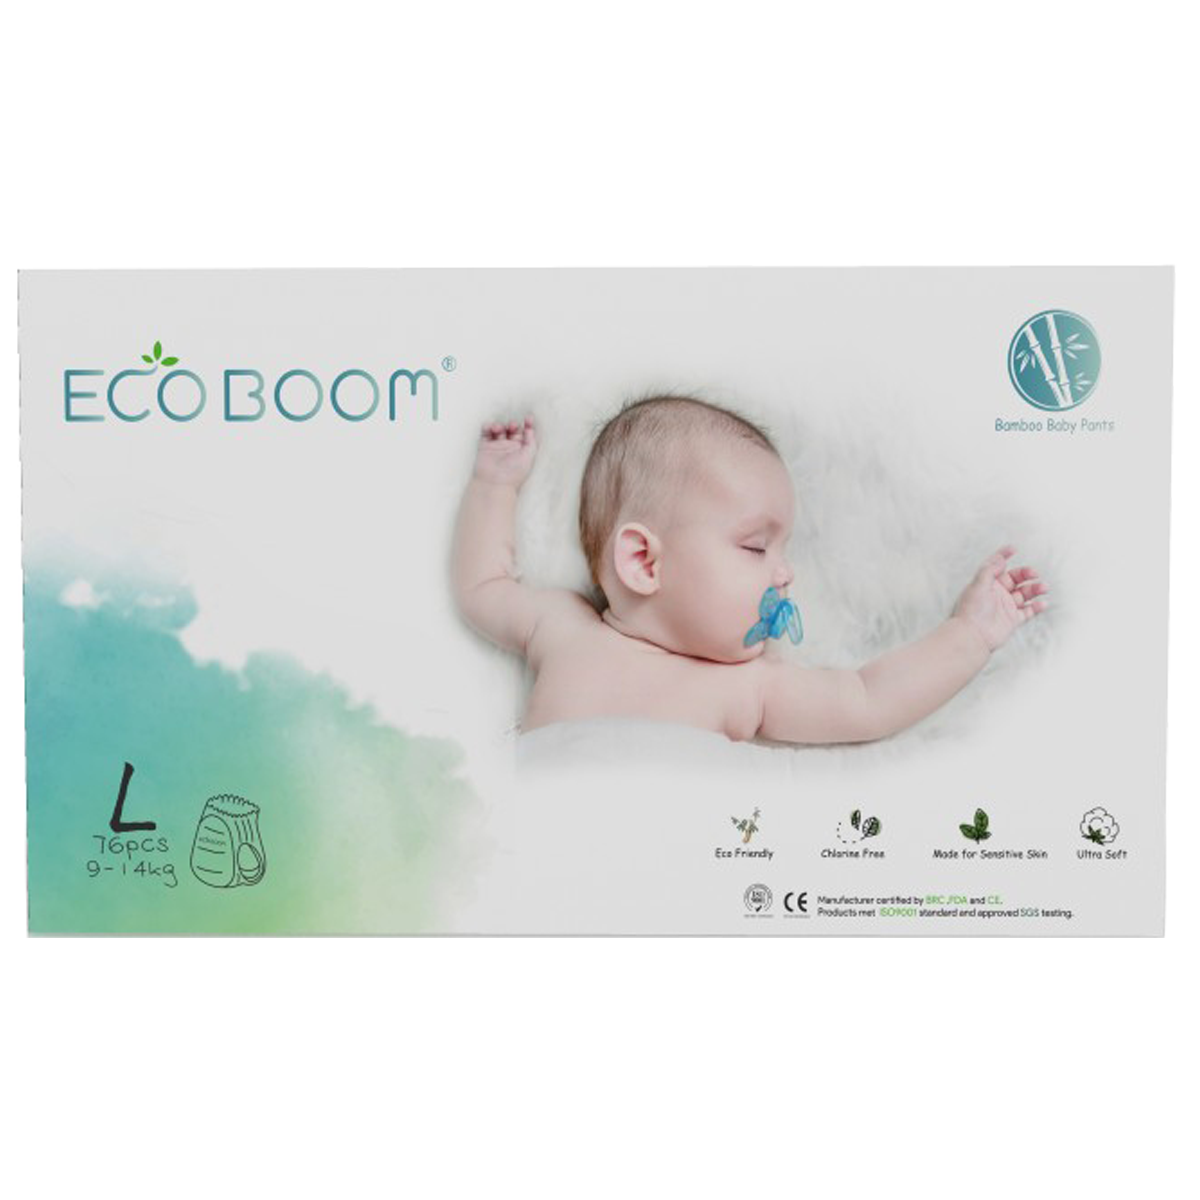 Large Pants Bamboo Eco Boom Eco Friendly Biodegradable Disposable Diapers for Babies 20-31 pounds, 76 pcs